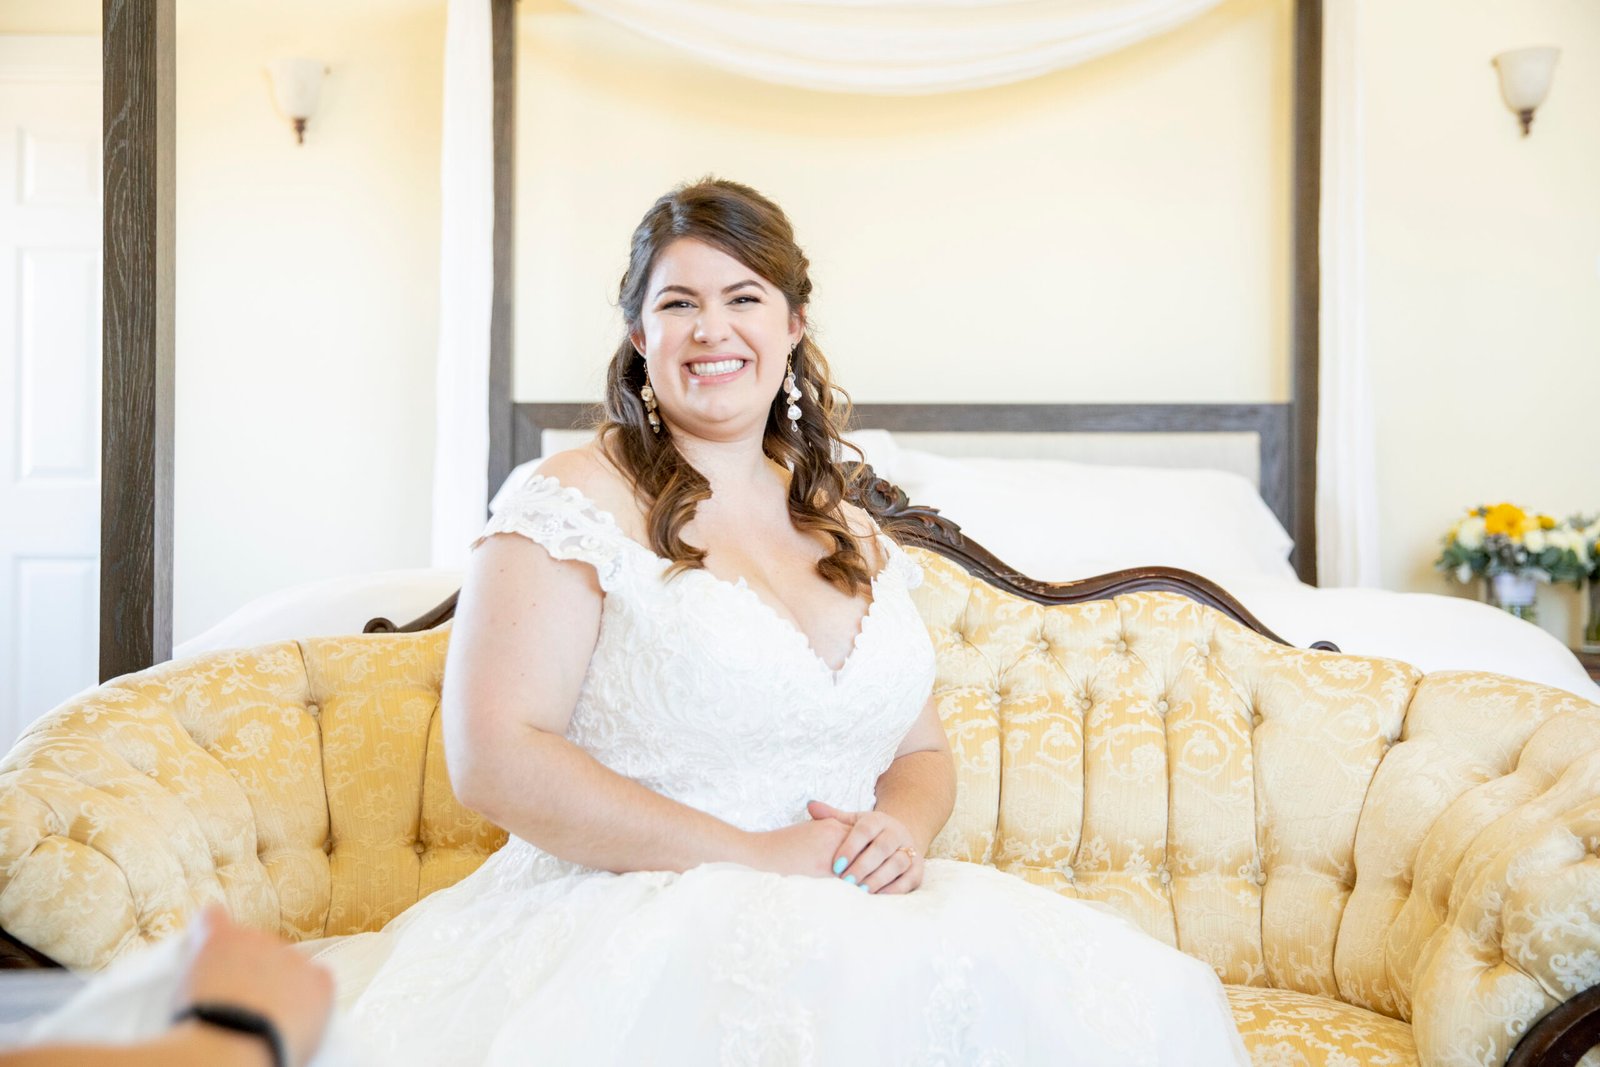 bride smiling at eh camera while sitting on an antique sofa in her wedding dress